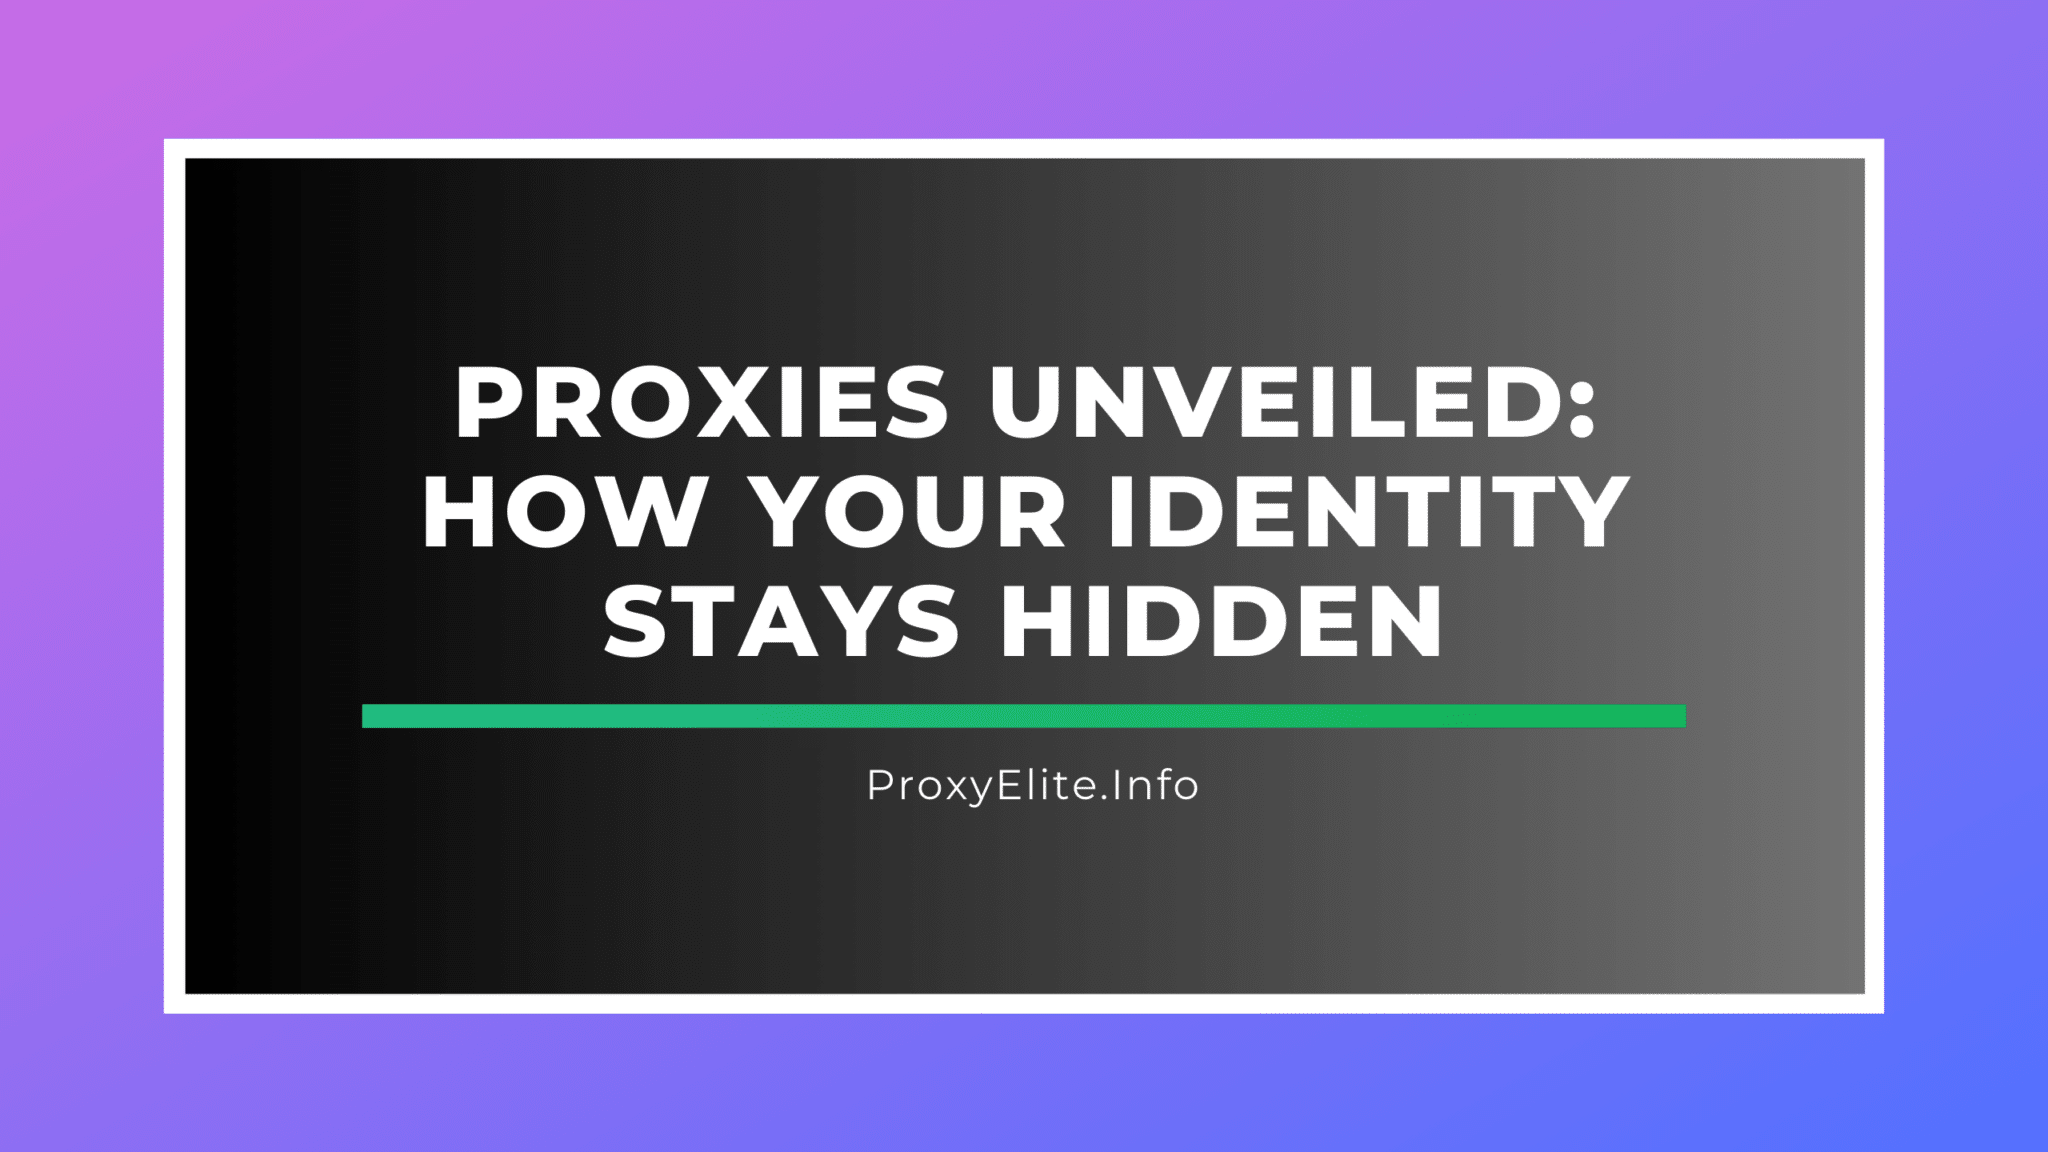 Proxies Unveiled: How Your Identity Stays Hidden